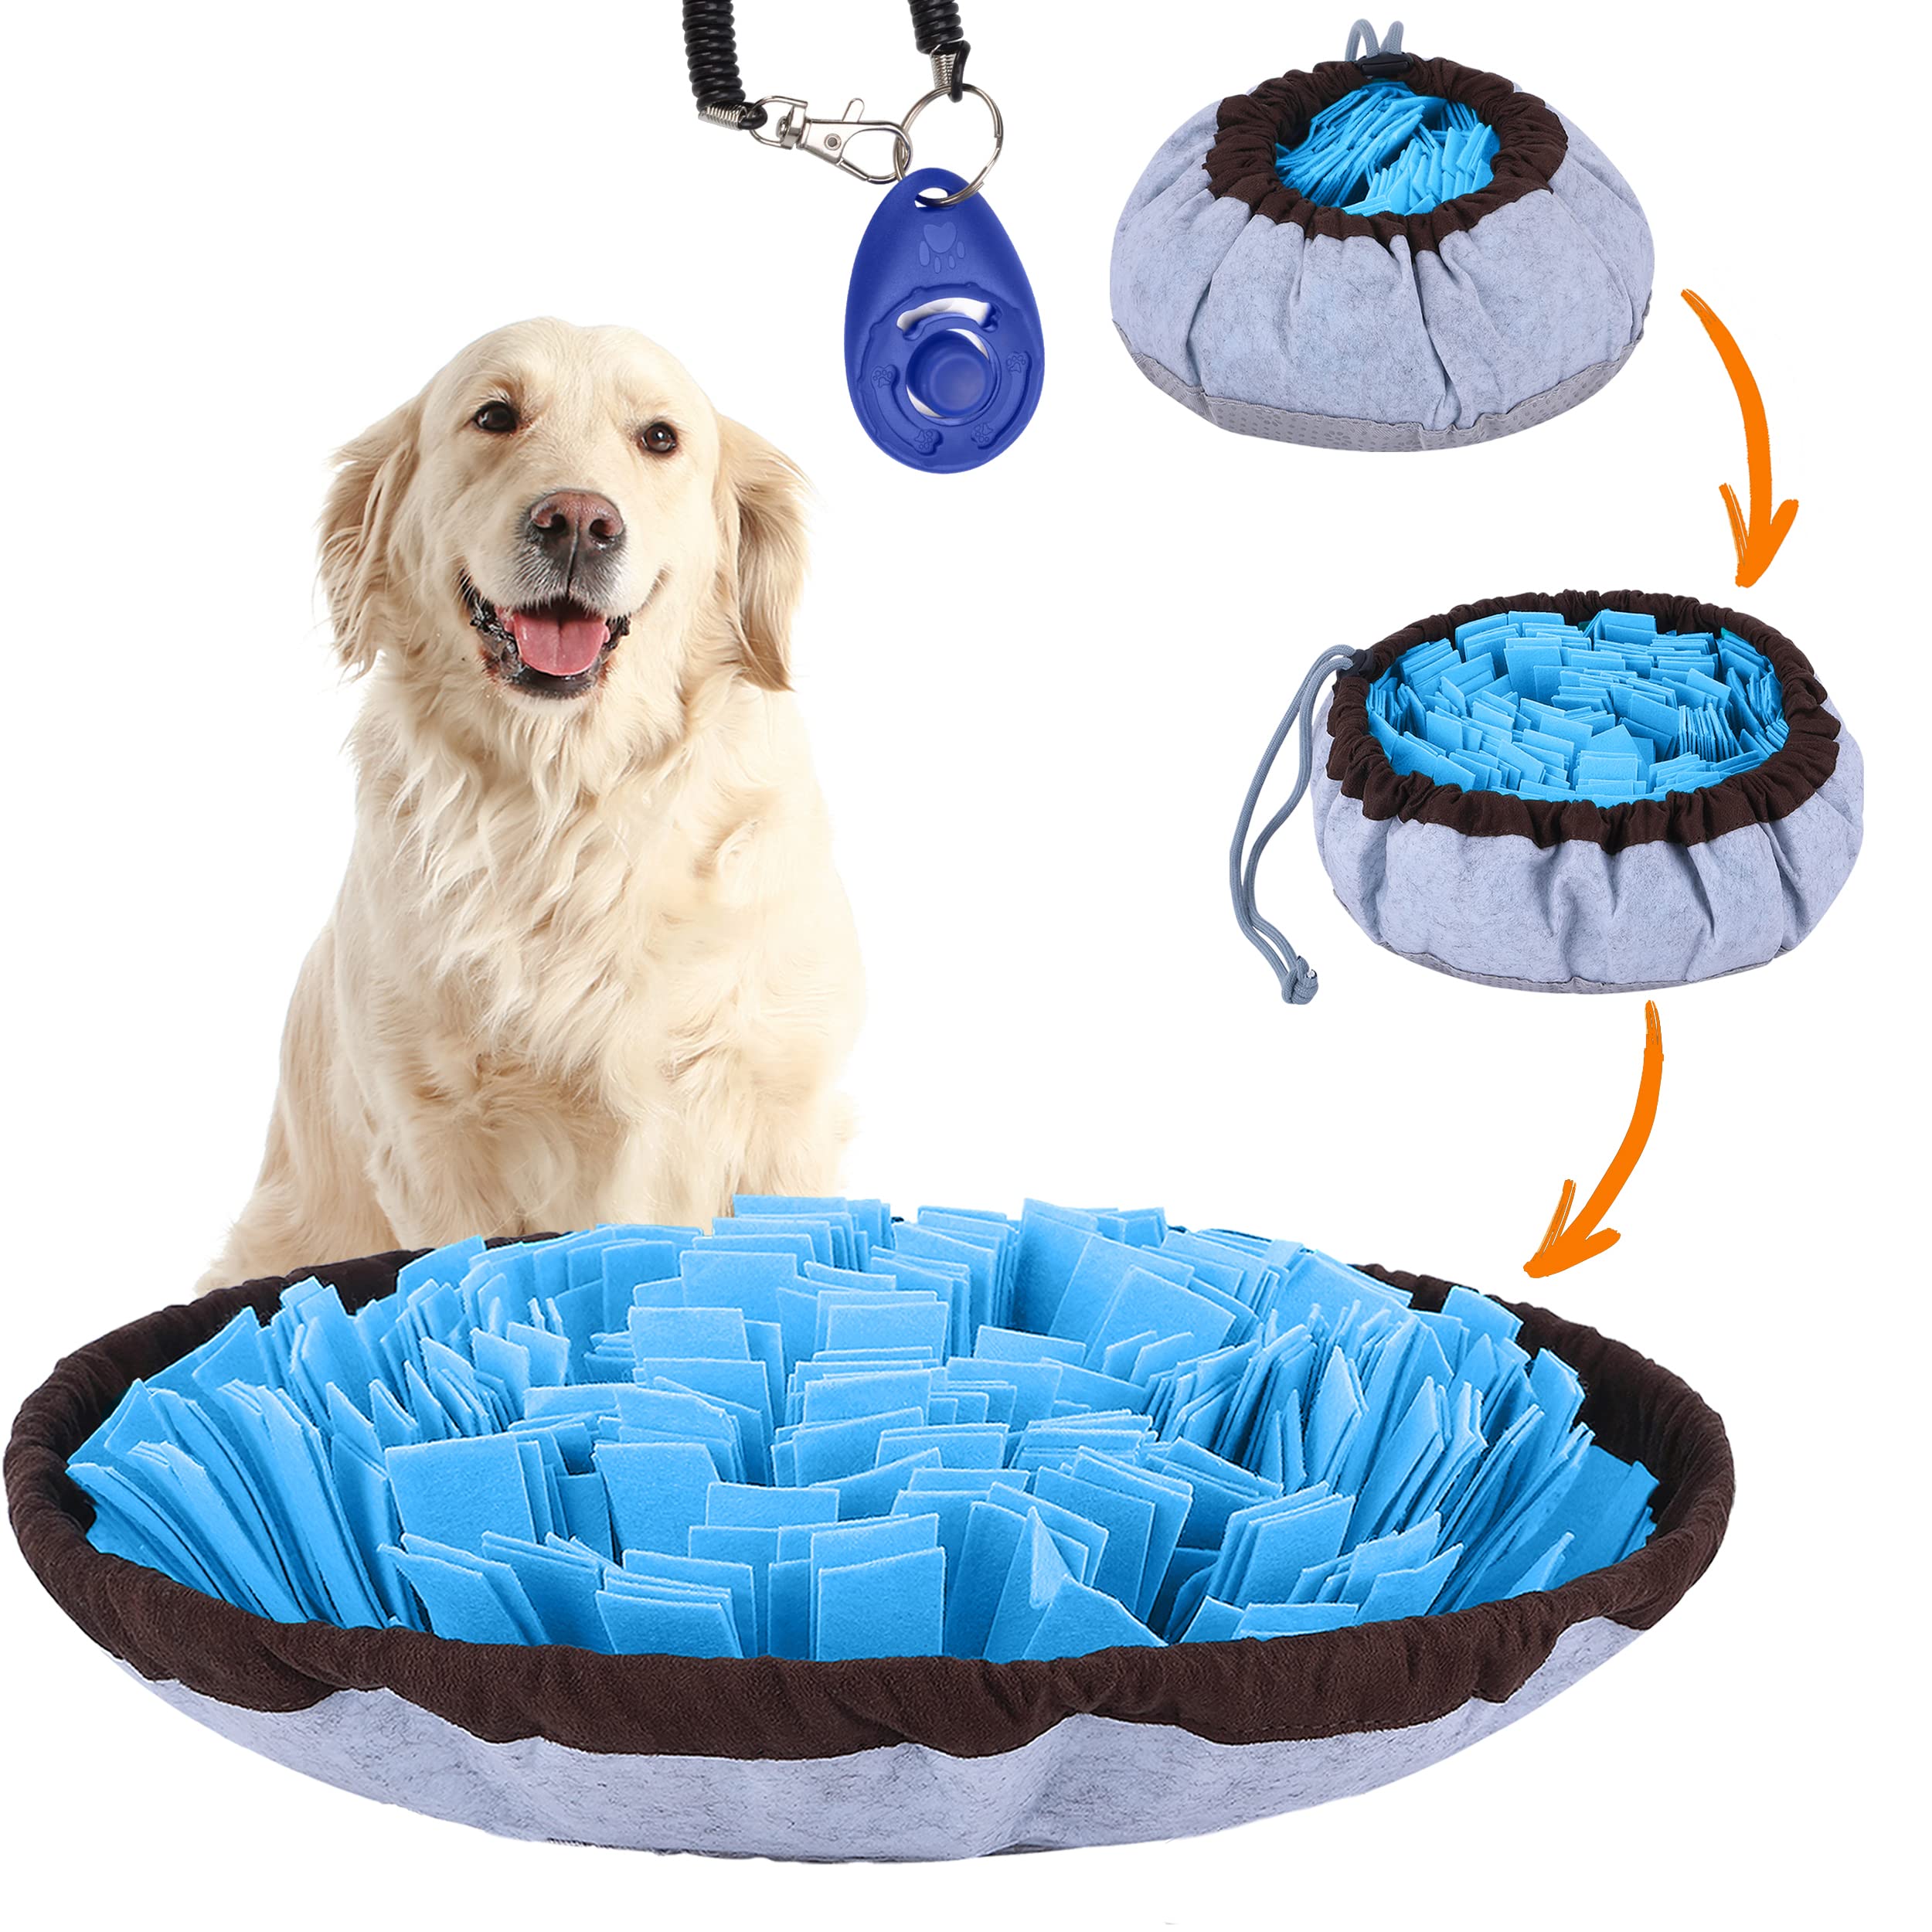 Dog Puzzle Toy, Pet Feeding Bowl For Small Medium Dogs, Feeding Bowl For  Dogs Puppies Interactive Toys For Dogs Cats, Dog Puzzle Toy Dog Toy Bowl